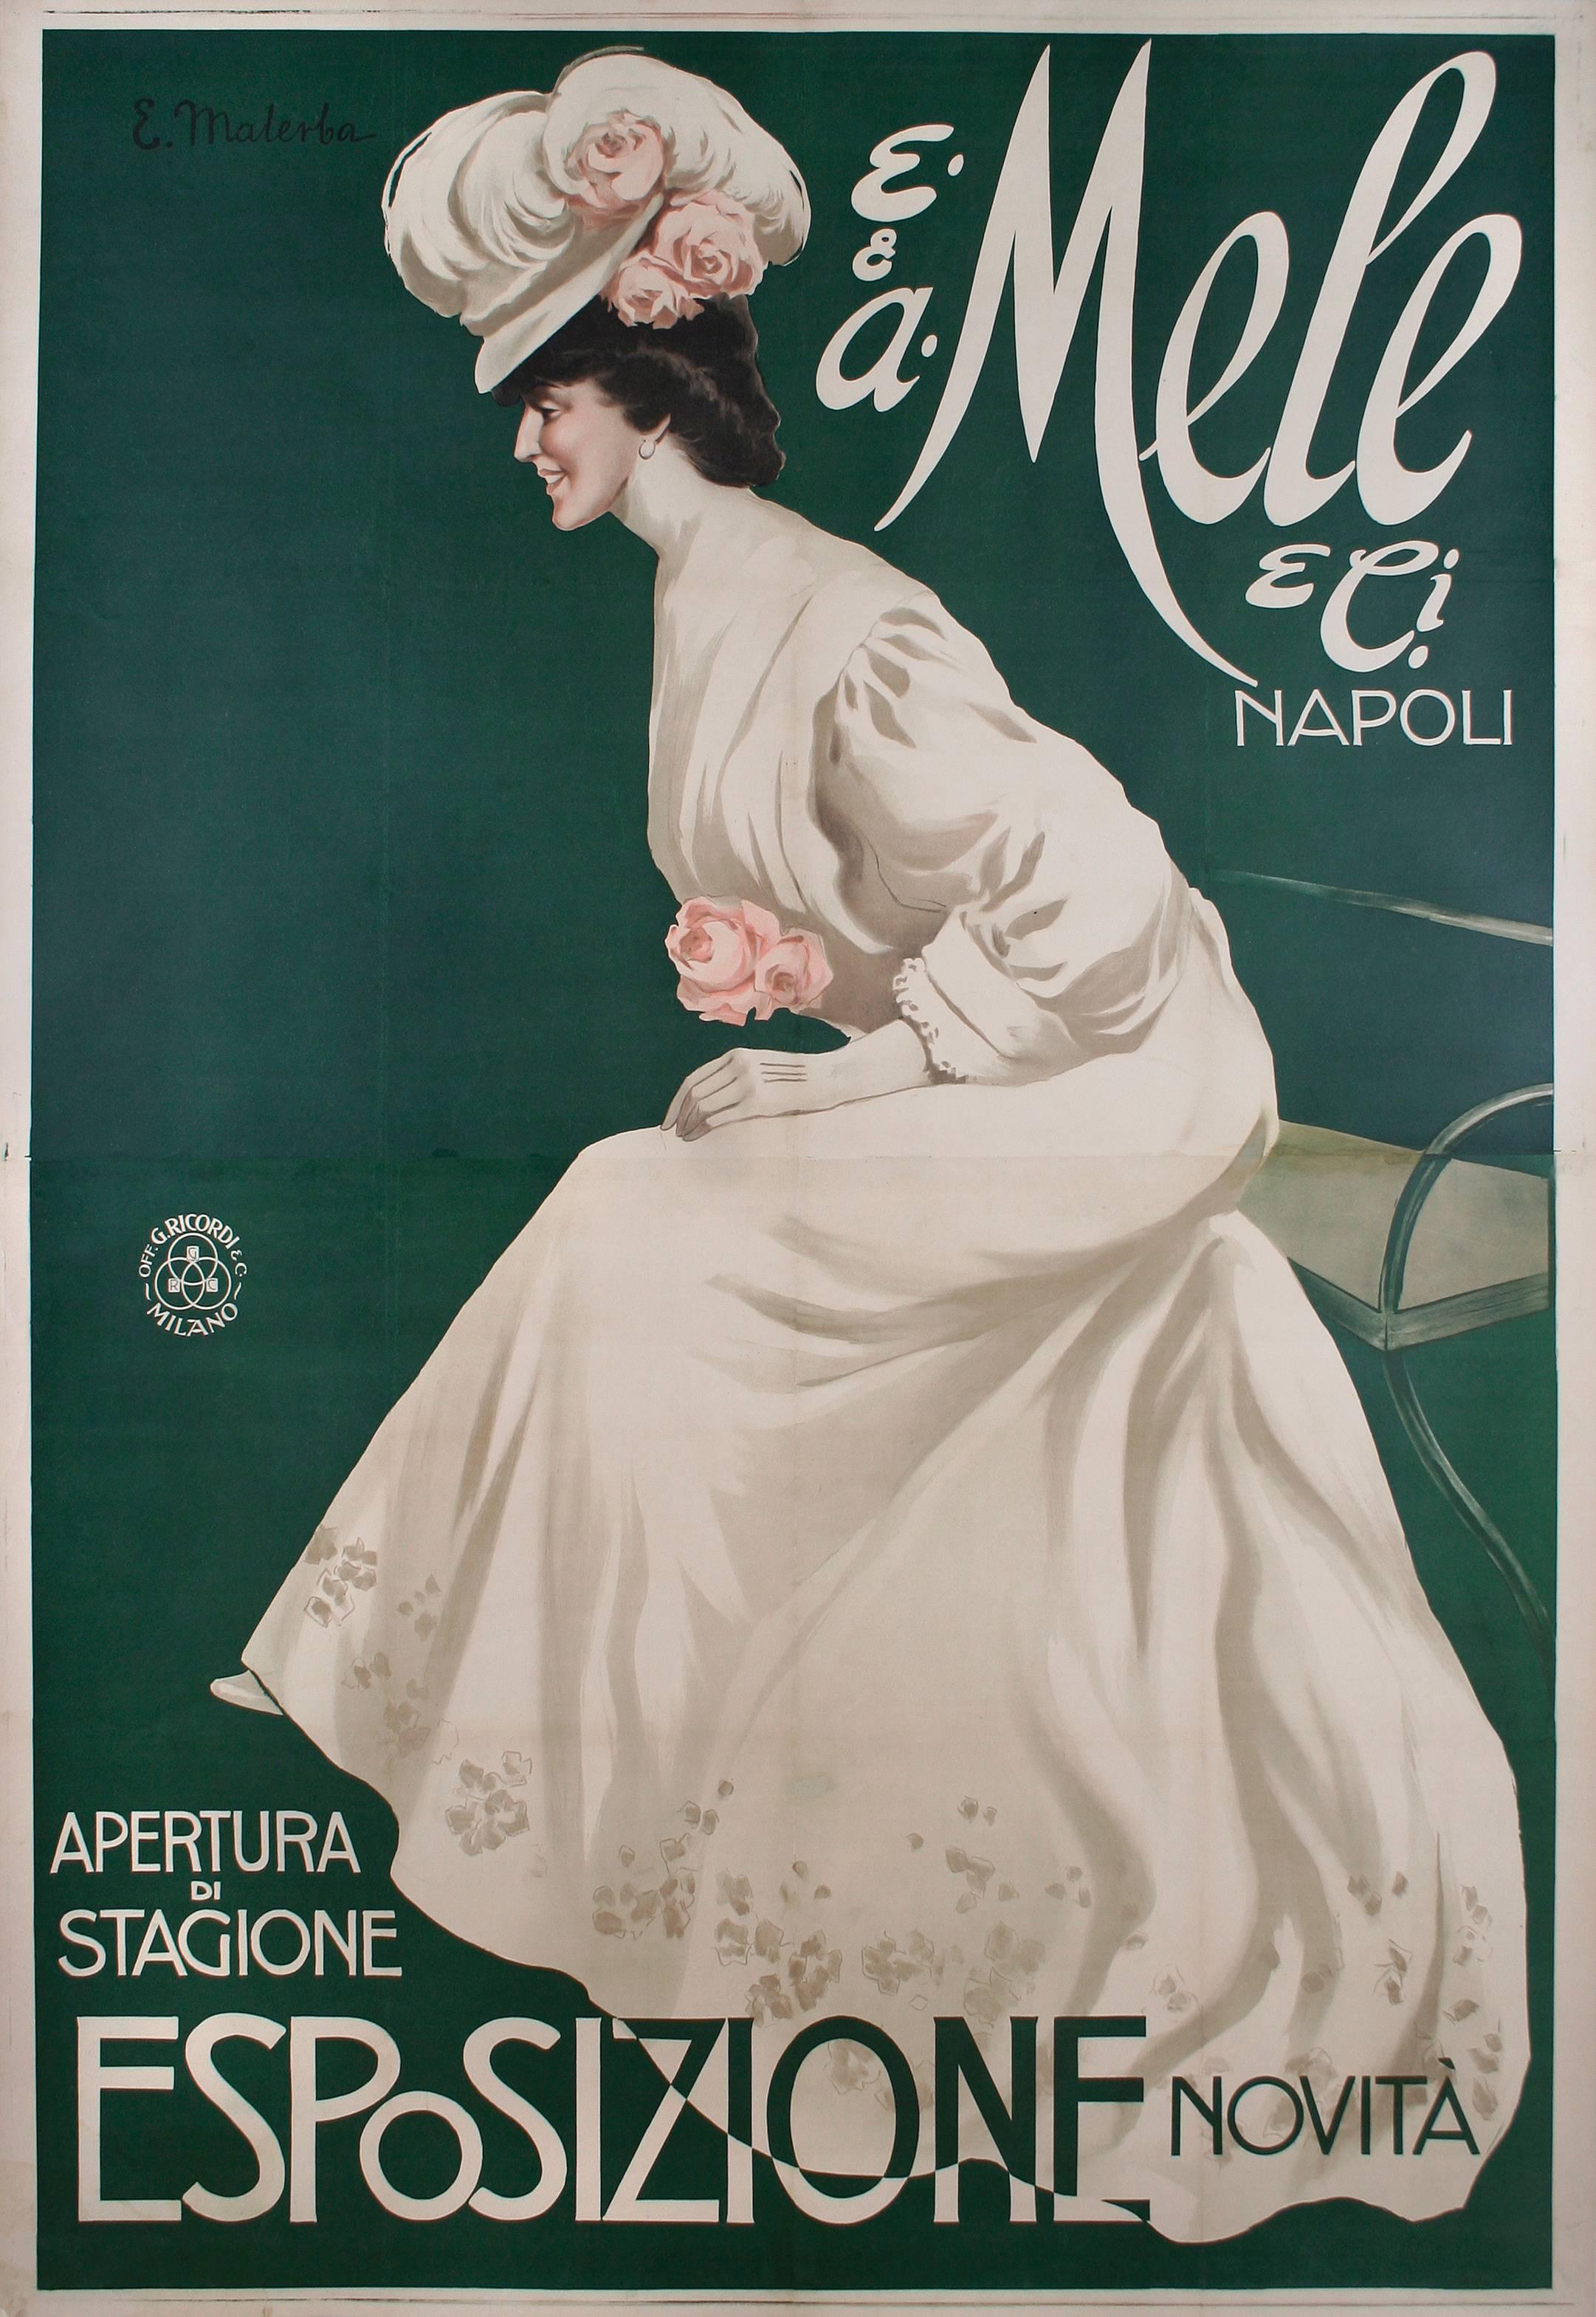 A lovely large (two sheet) Italian fashion poster by Gian Emilio Malerba, 1906. This is an advertisement for the Mele Department Store's new line of women's fashions.  

Gian Emilio Malerba (1880-1926) was an Italian born painter and illustrator